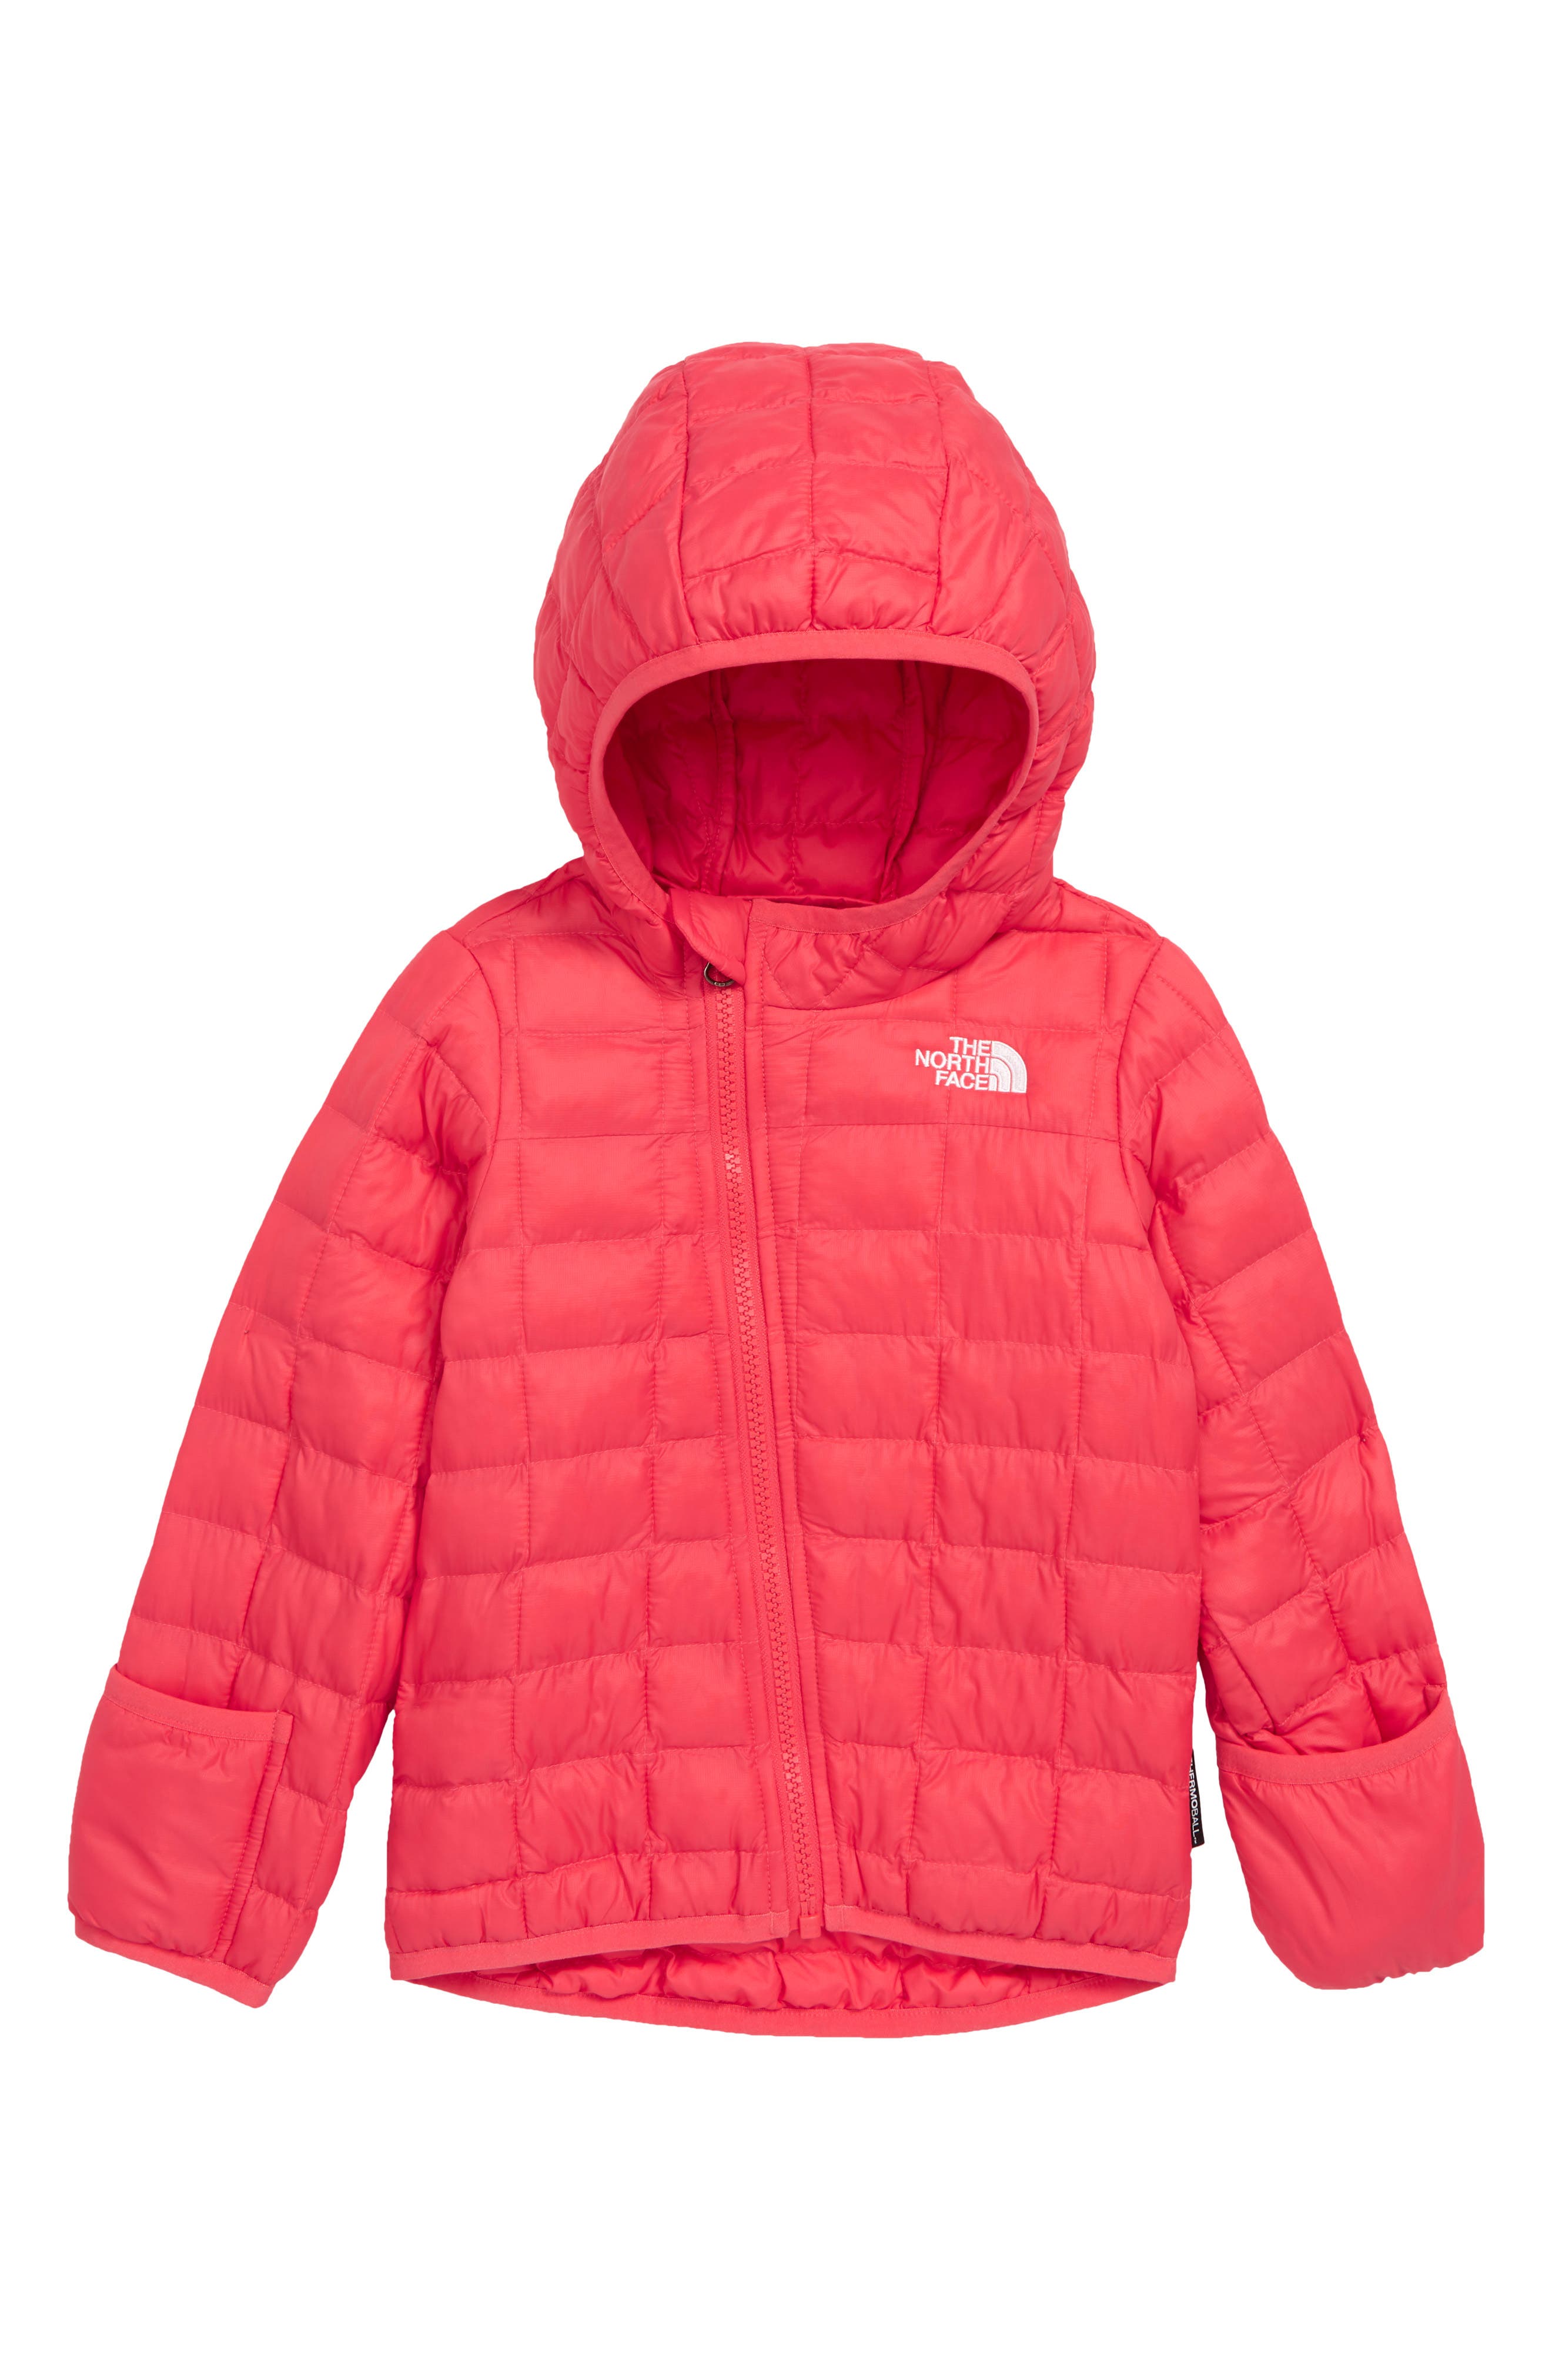 Baby The North Face \u0026 Kids Sale 